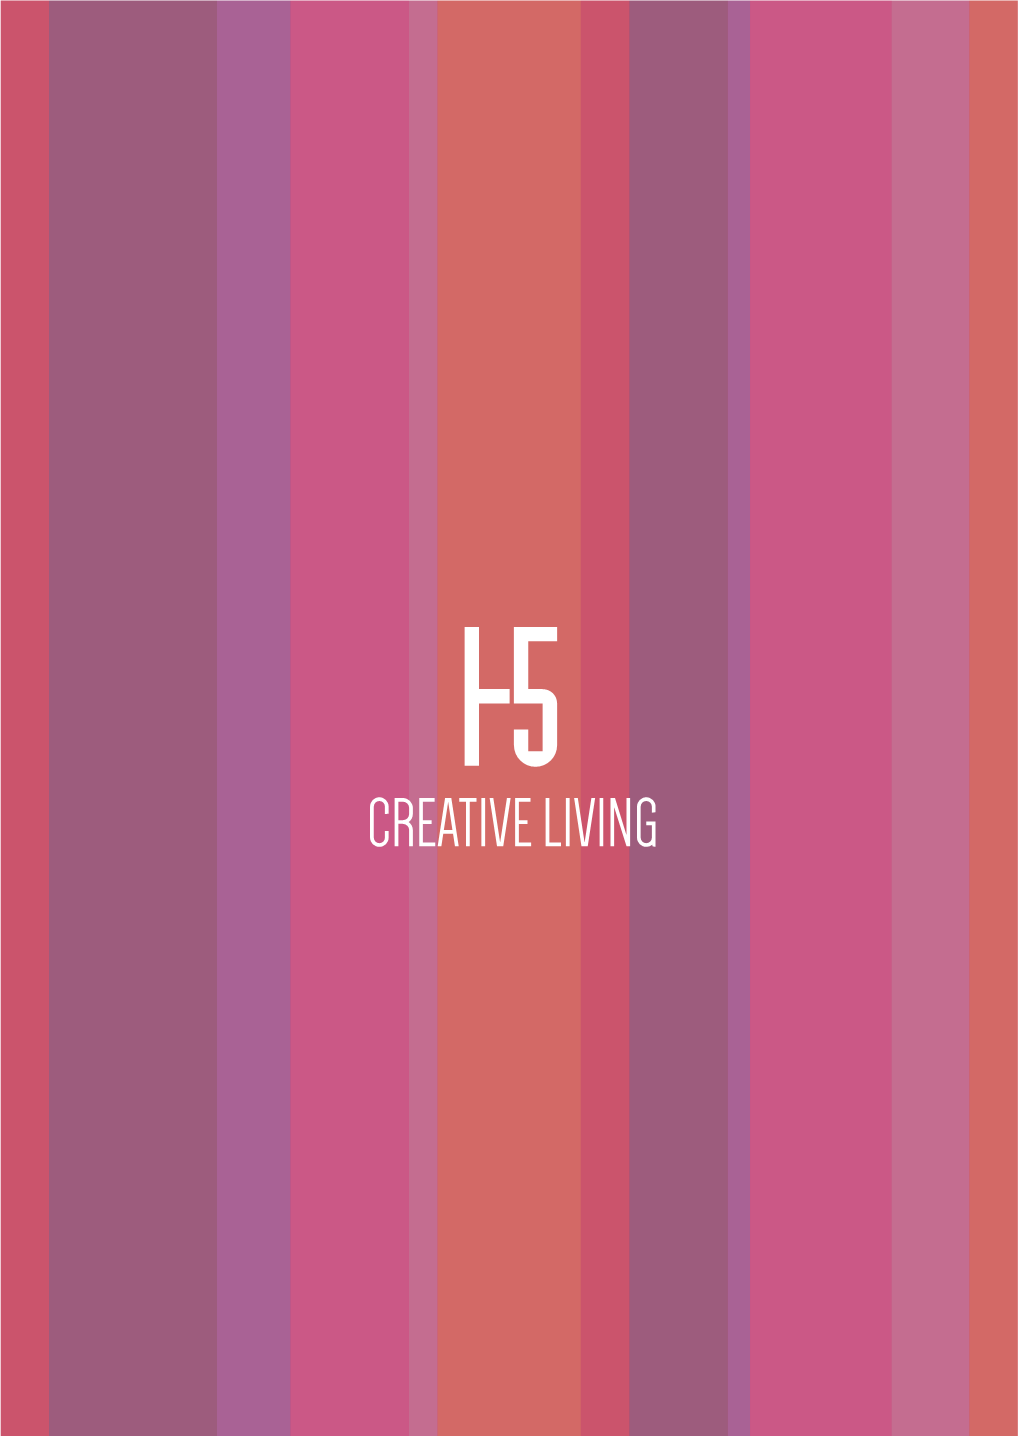 CREATIVE LIVING WELCOME HOME Modern, Stylish Apartments in a Uniquely Convenient Location